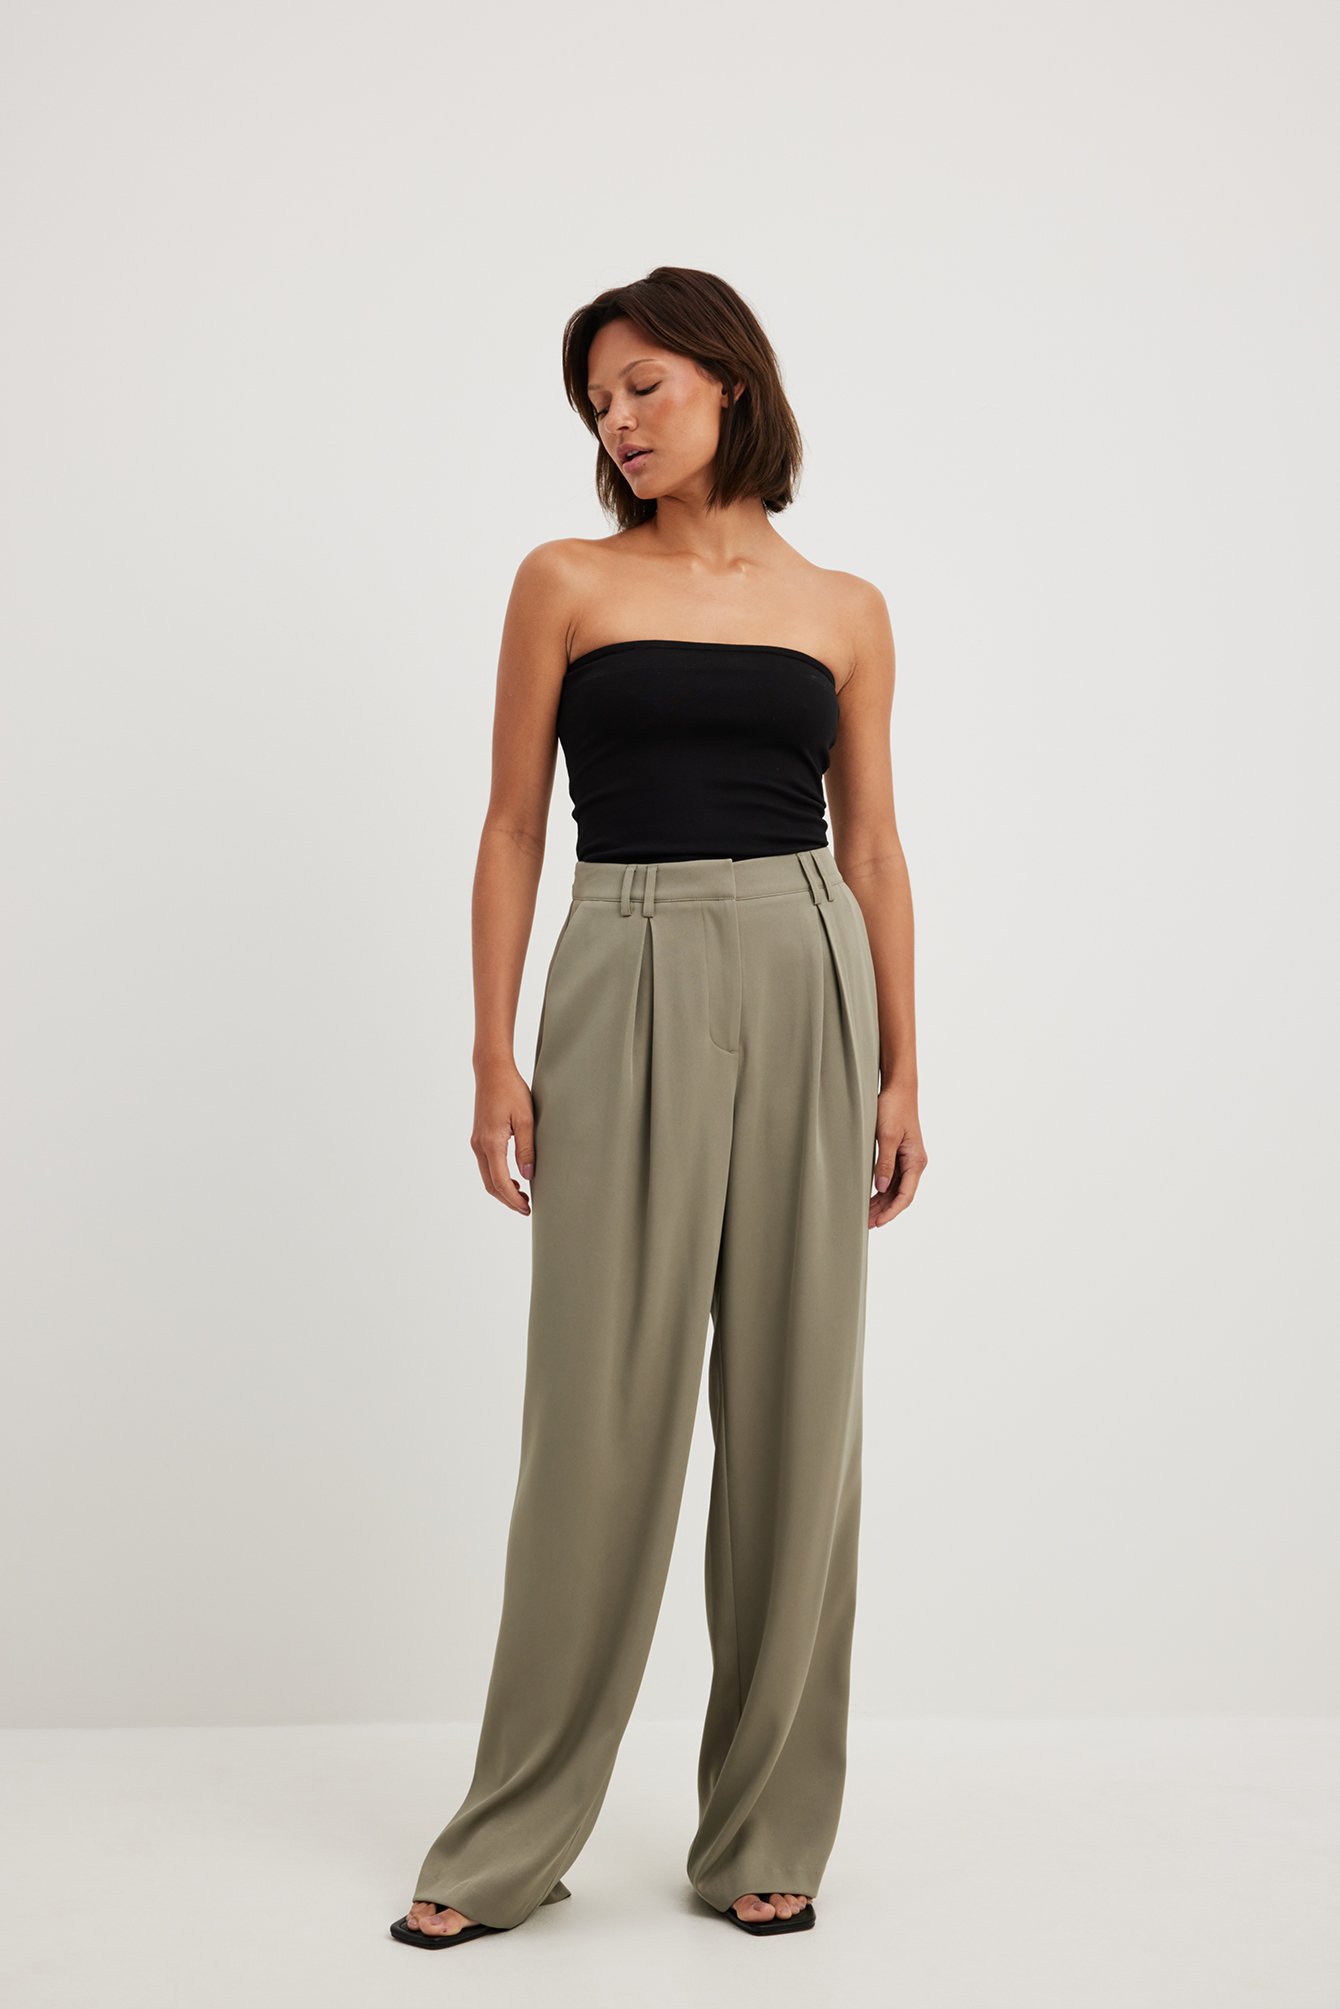 Buy FOREVER 21 Teal Green Palazzo Trousers  Trousers for Women 1337777   Myntra